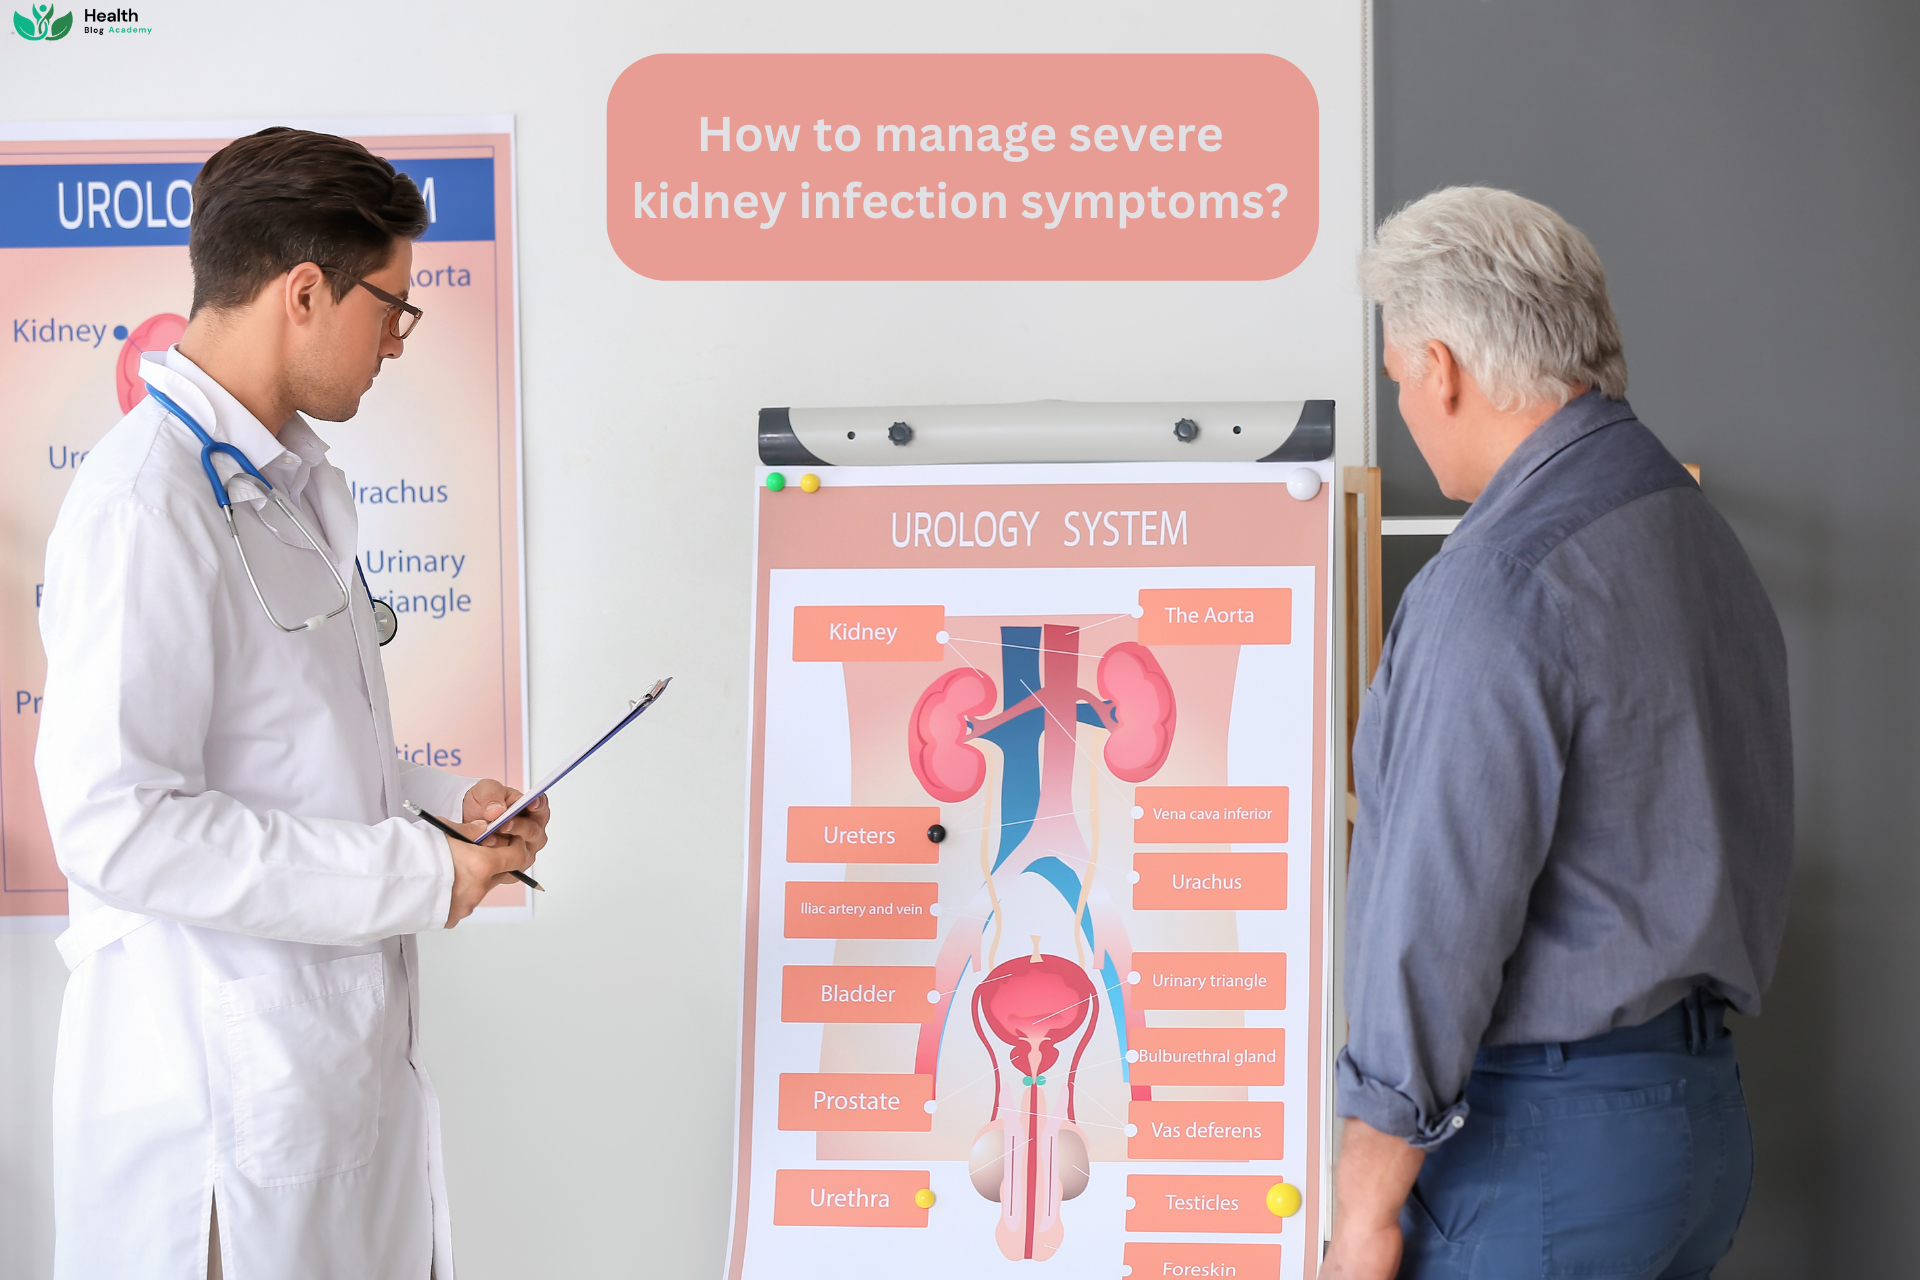 How to manage severe kidney infection symptoms?